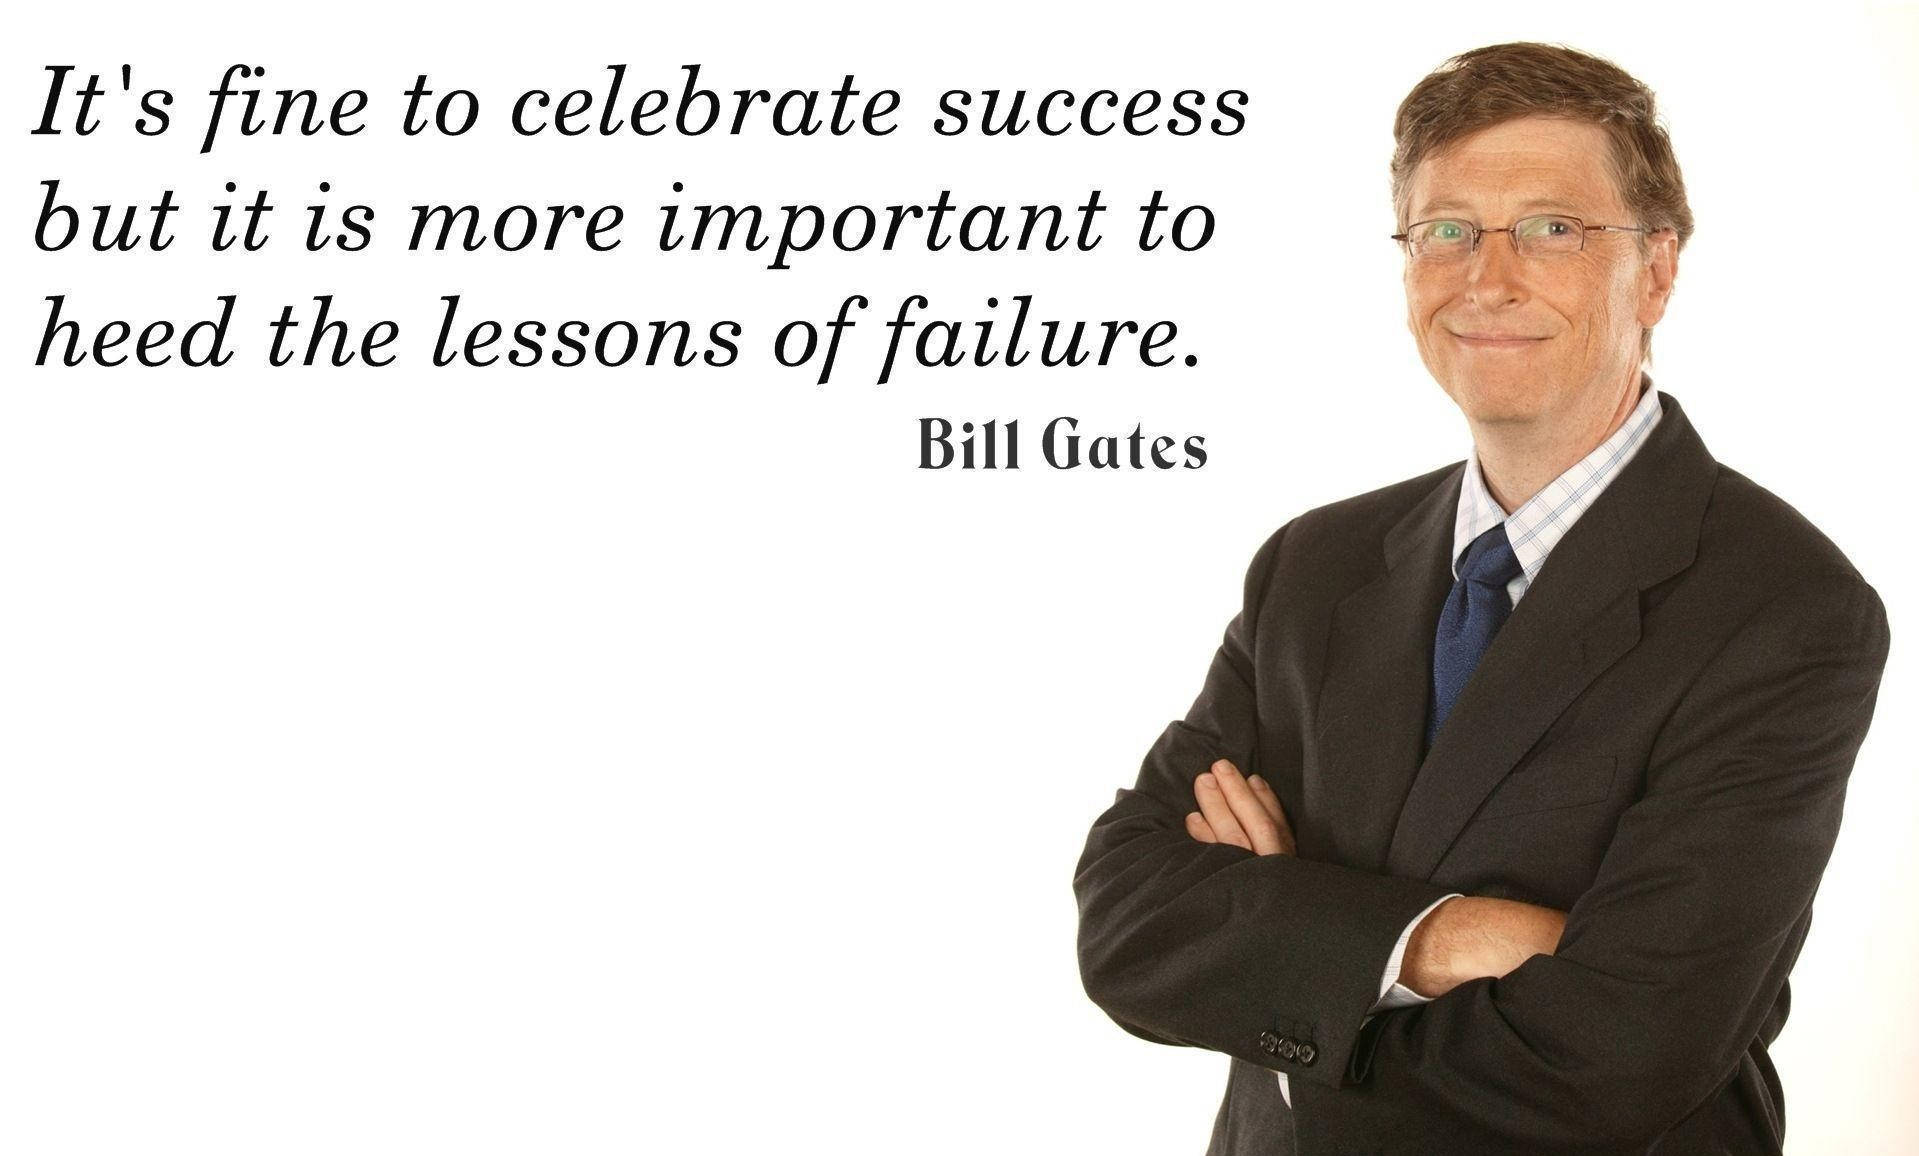 Quote By Bill Gates Background